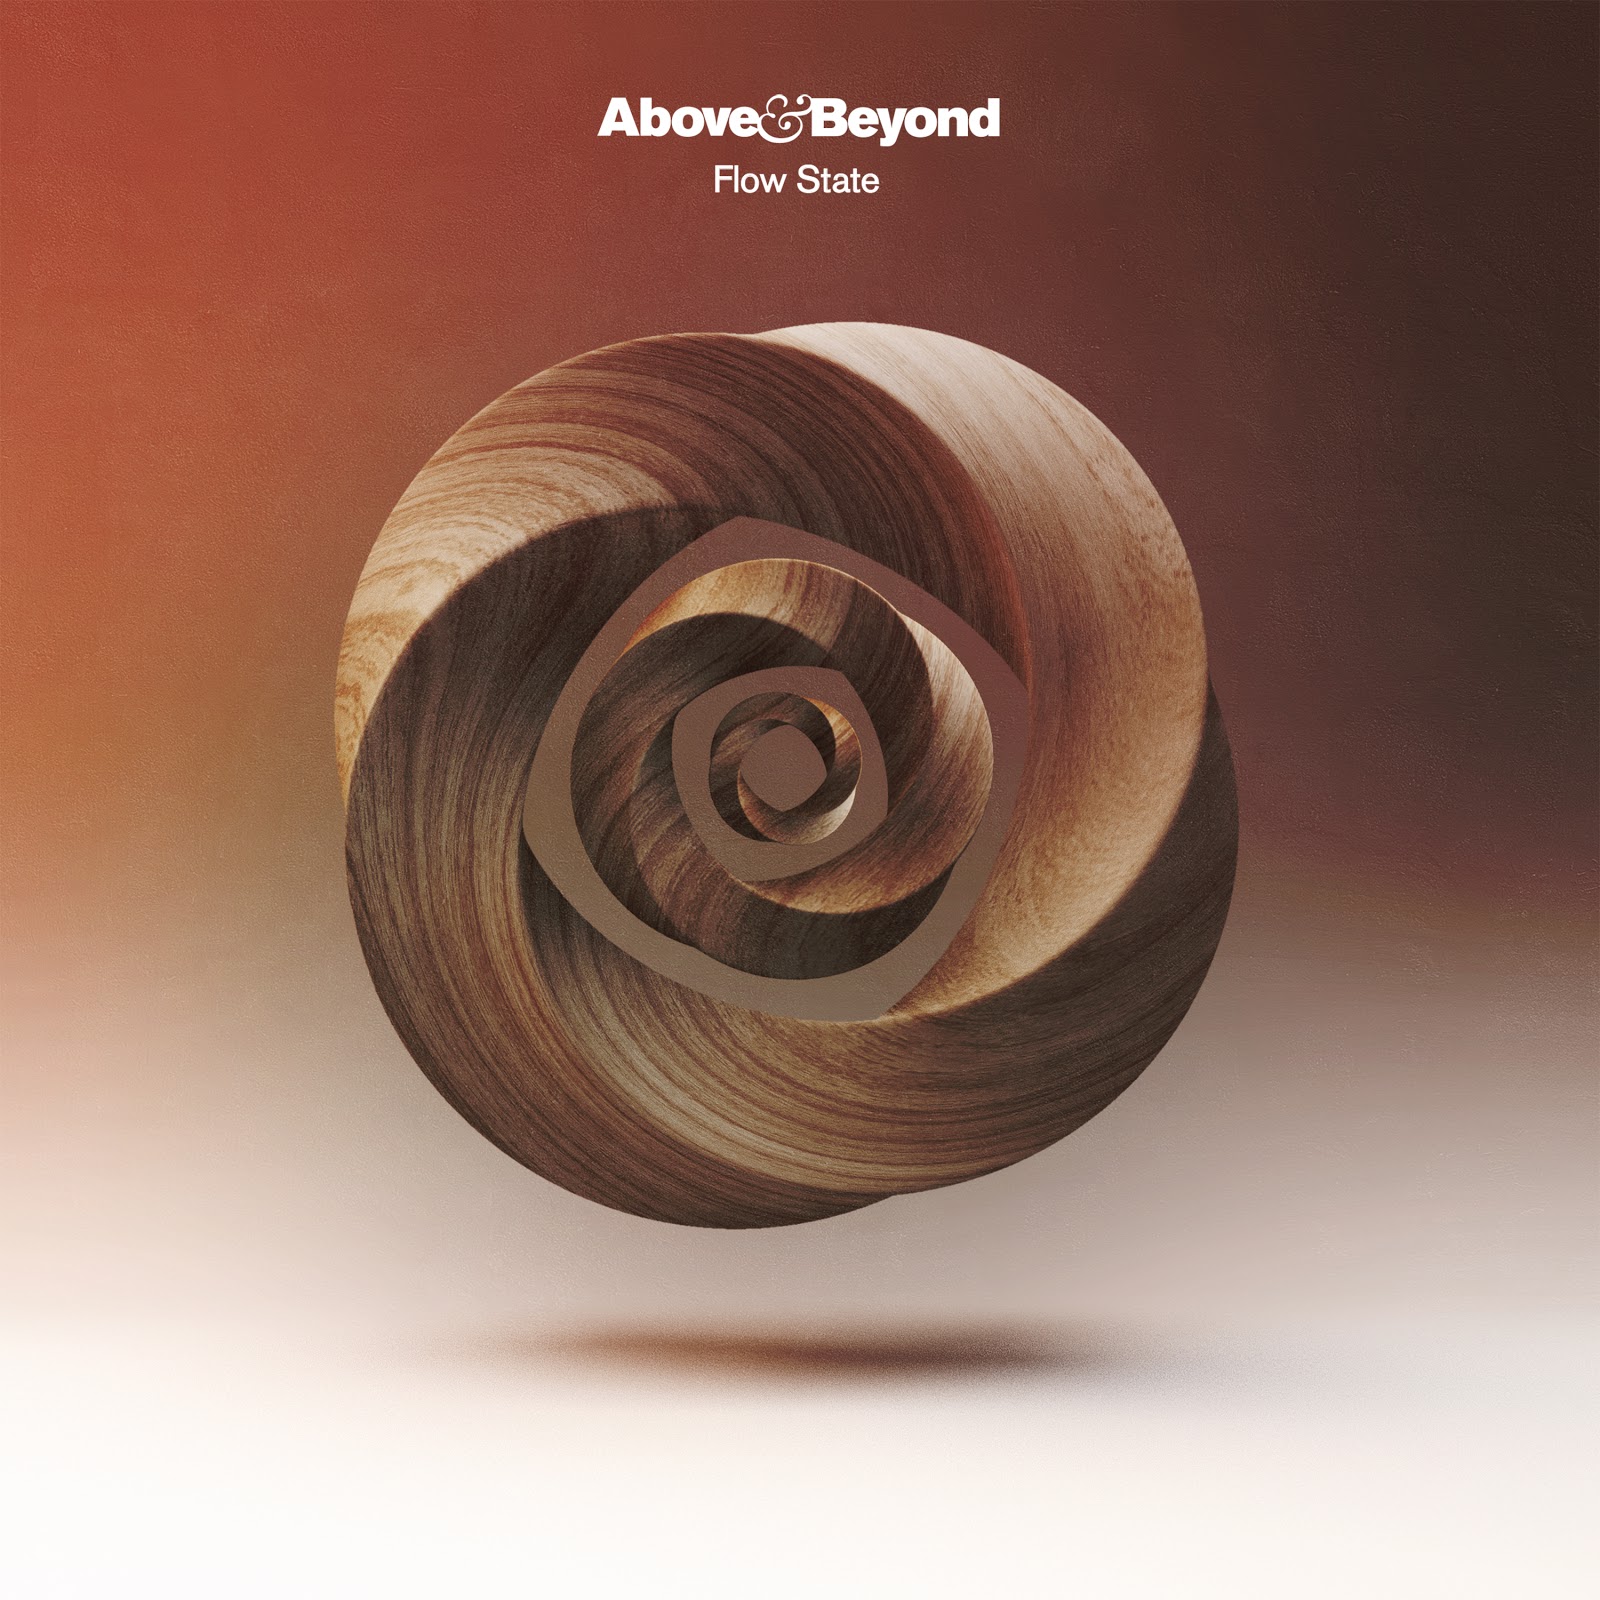 Above and Beyond presents Flow State on Anjunabeats